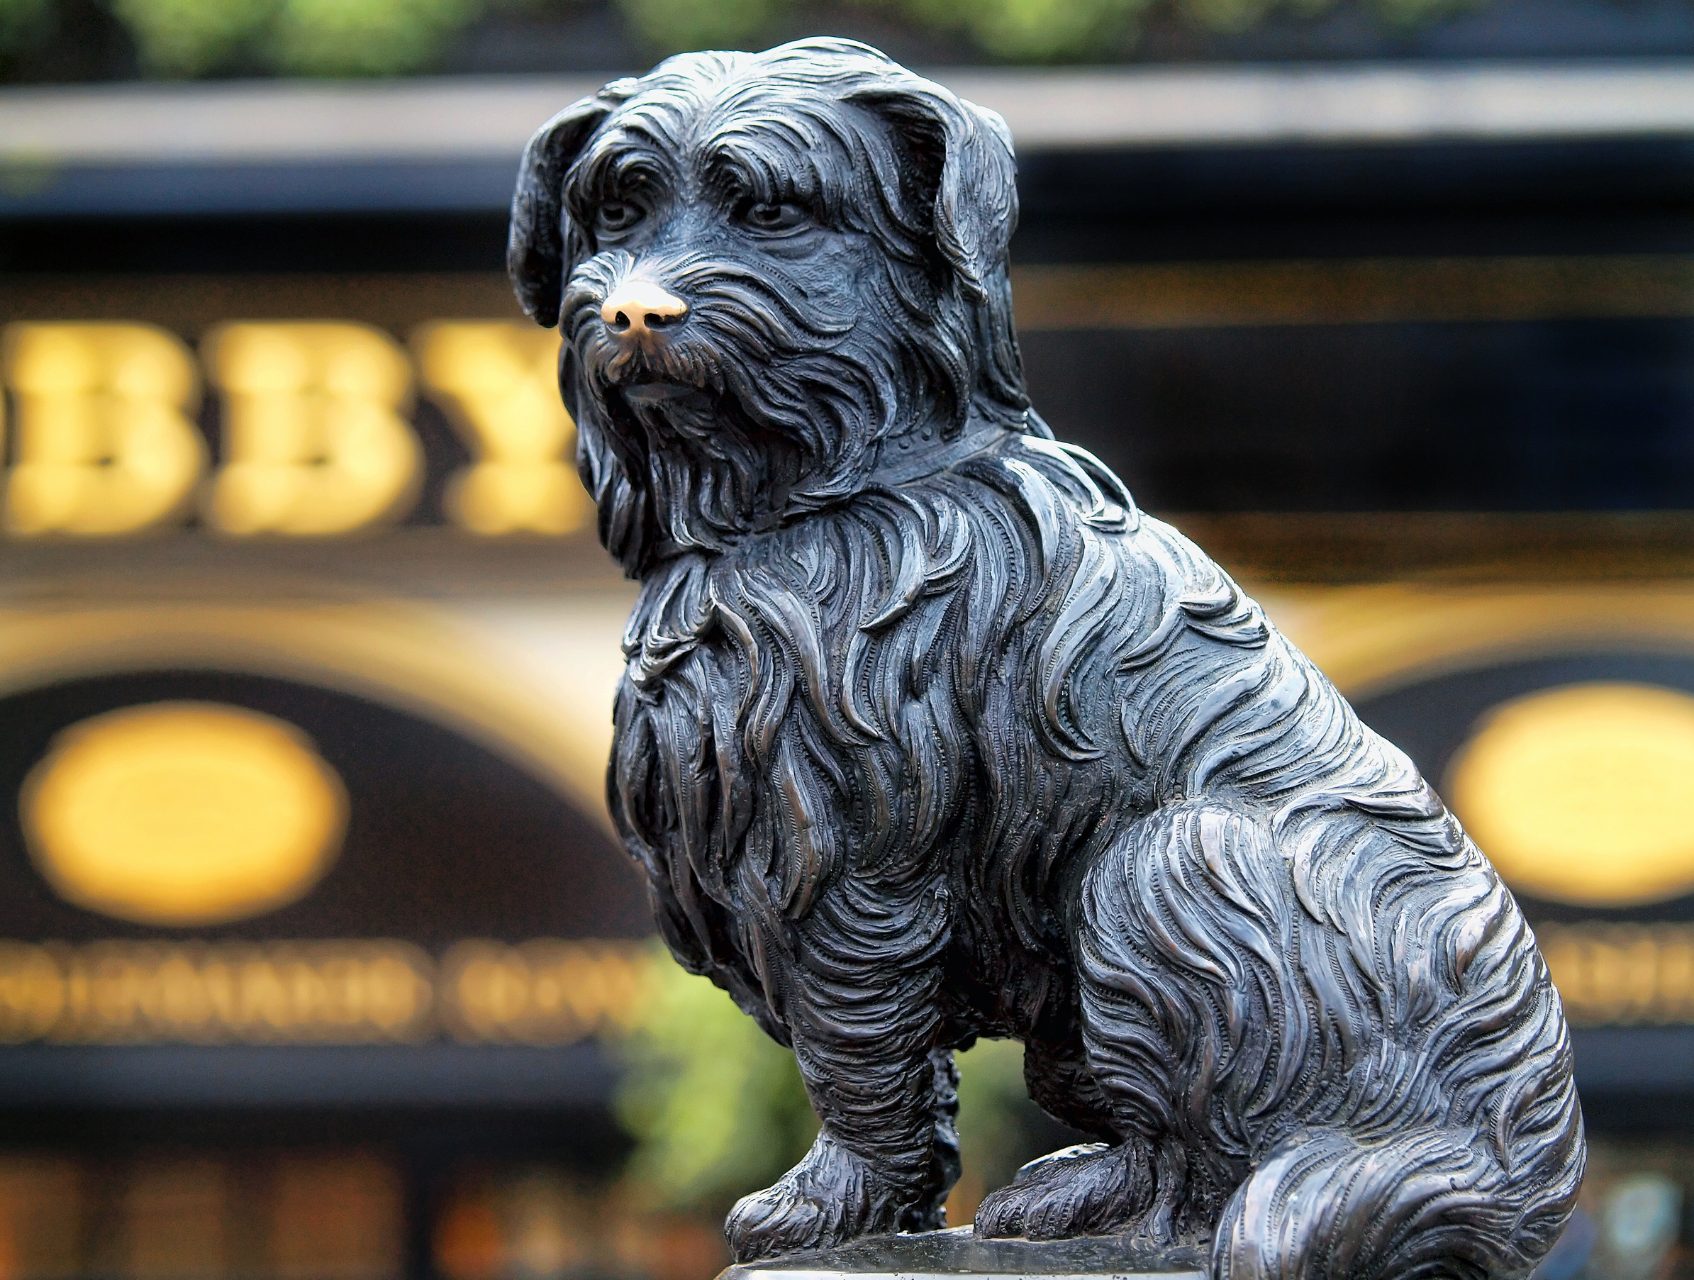 A photograph of a metal sculpture of a small black dog sitting on top of a pedestal. The dog has a fluffy coat. The sculpture is made of a black metal and has intricate details on its face and body. The nose is shiny from being rubbed by tourists. The background is a blurry image of a street.